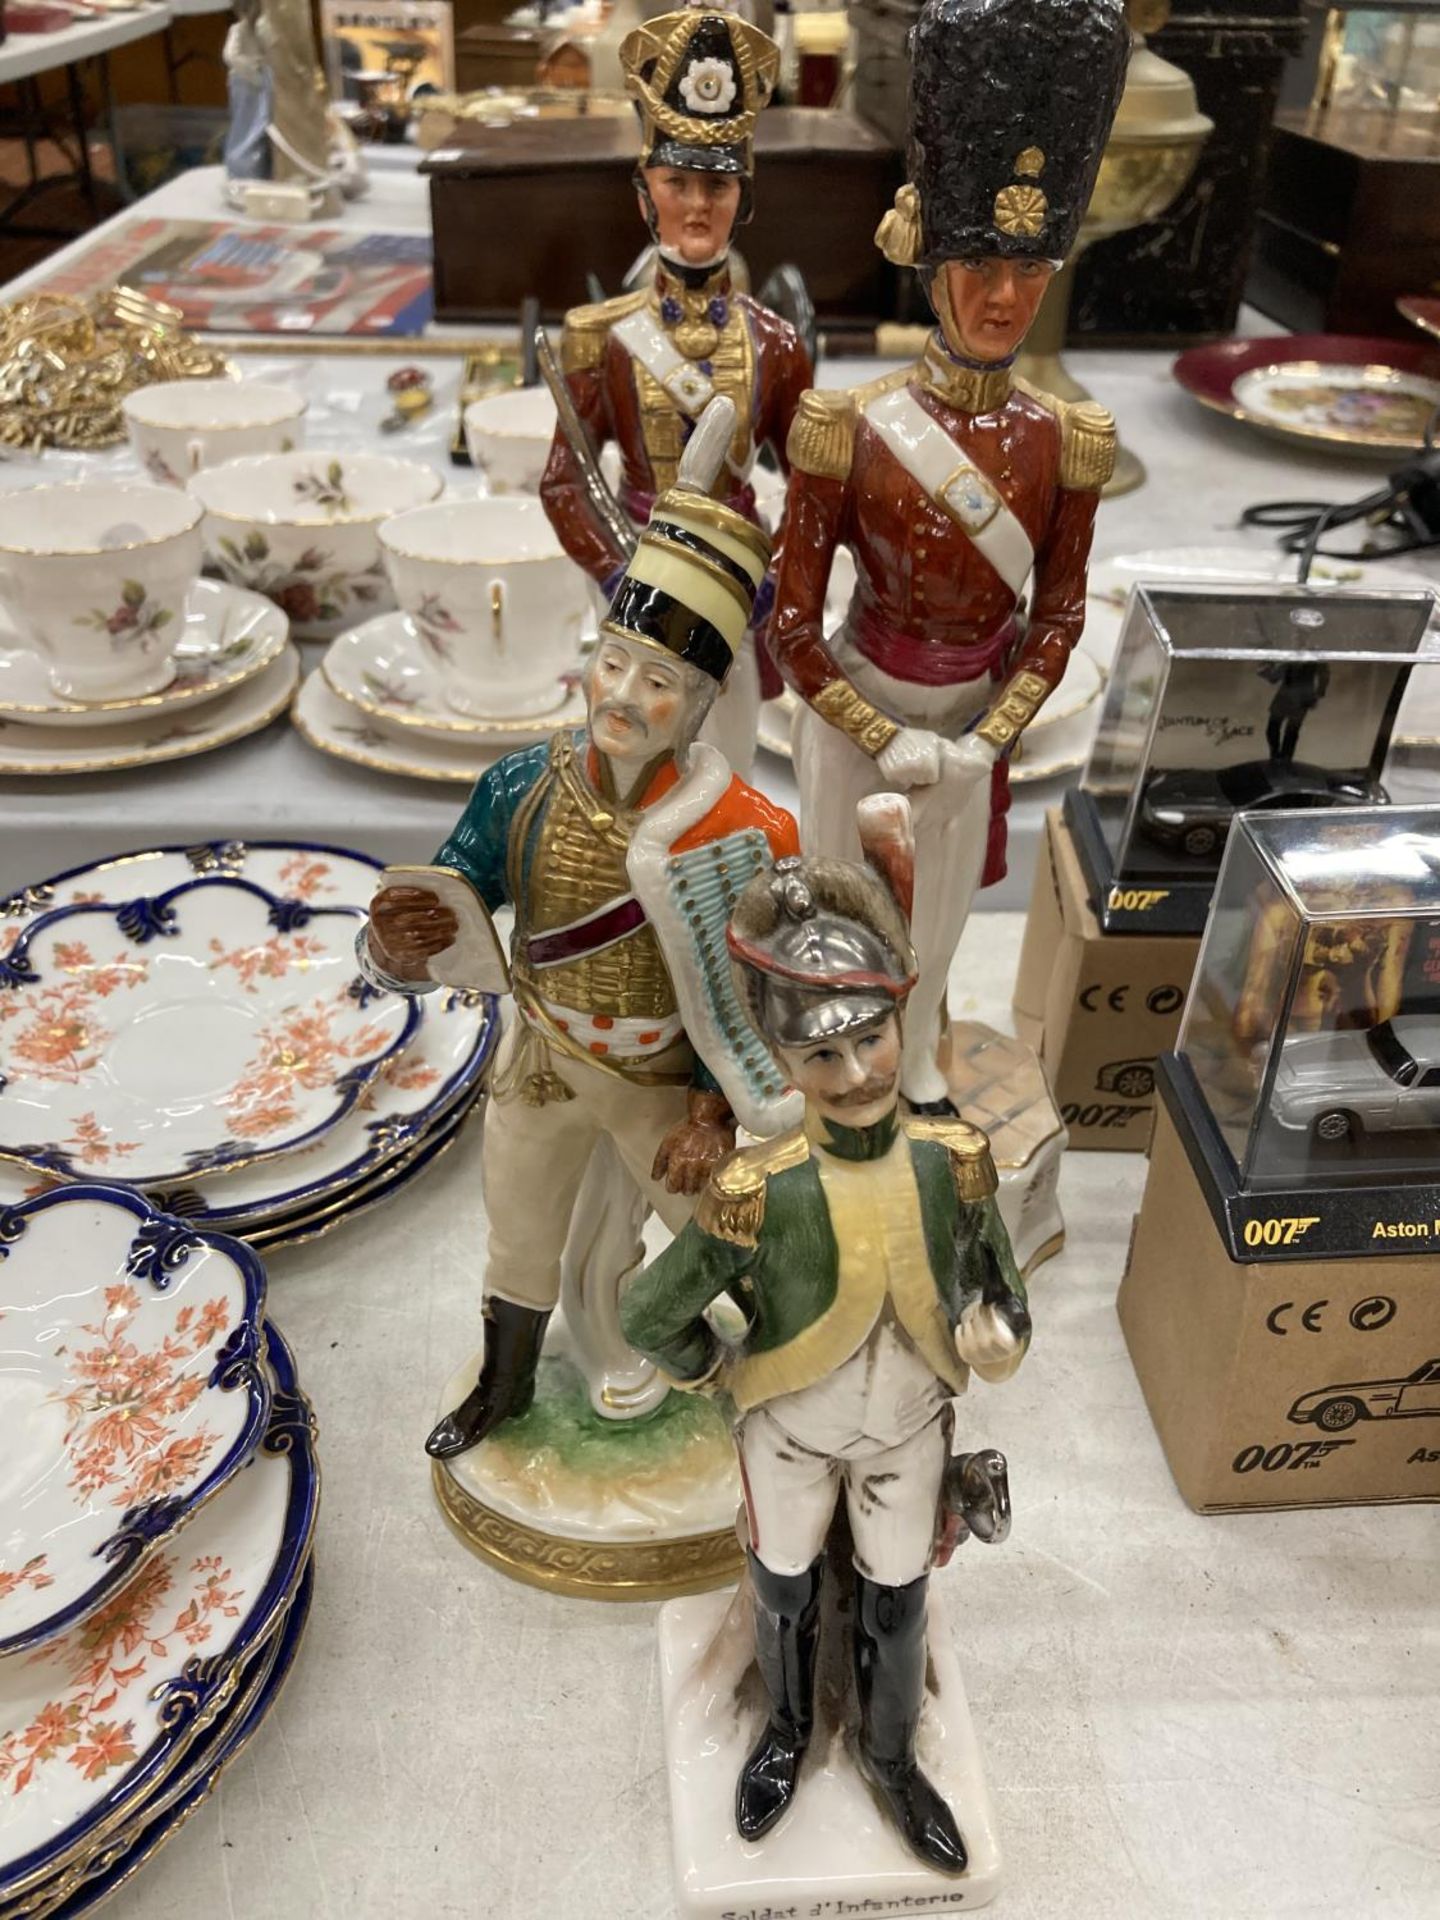 FOUR CERAMIC SOLDIER FIGURES TO INCLUDE OFFICER 3RD GUARDS REGIMENT, OFFICER SCOTS FUSILIER